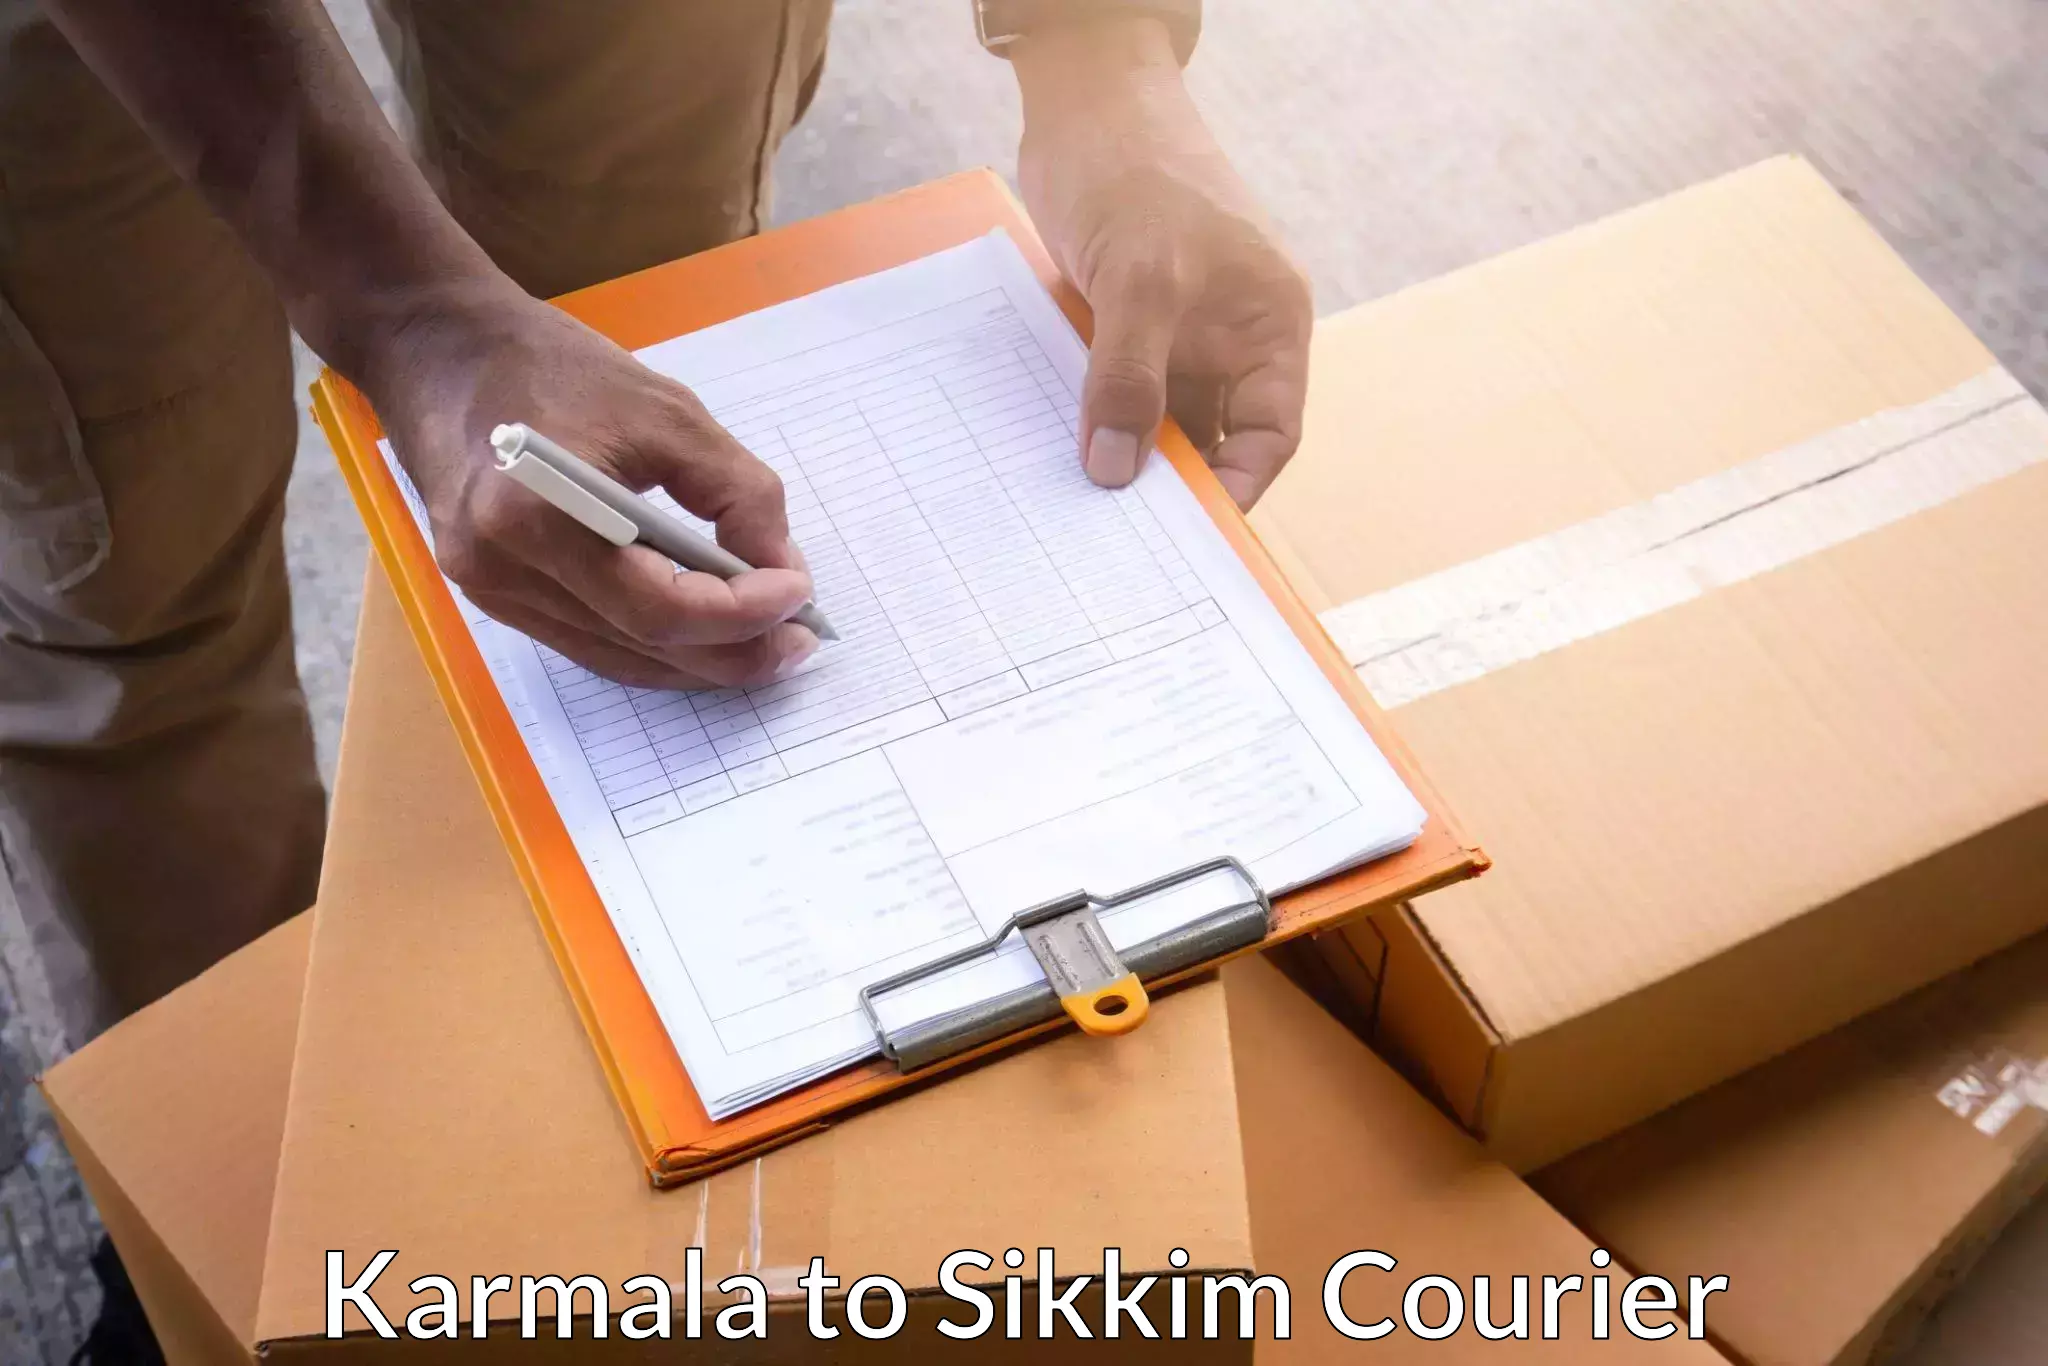 Next-day delivery options Karmala to Sikkim